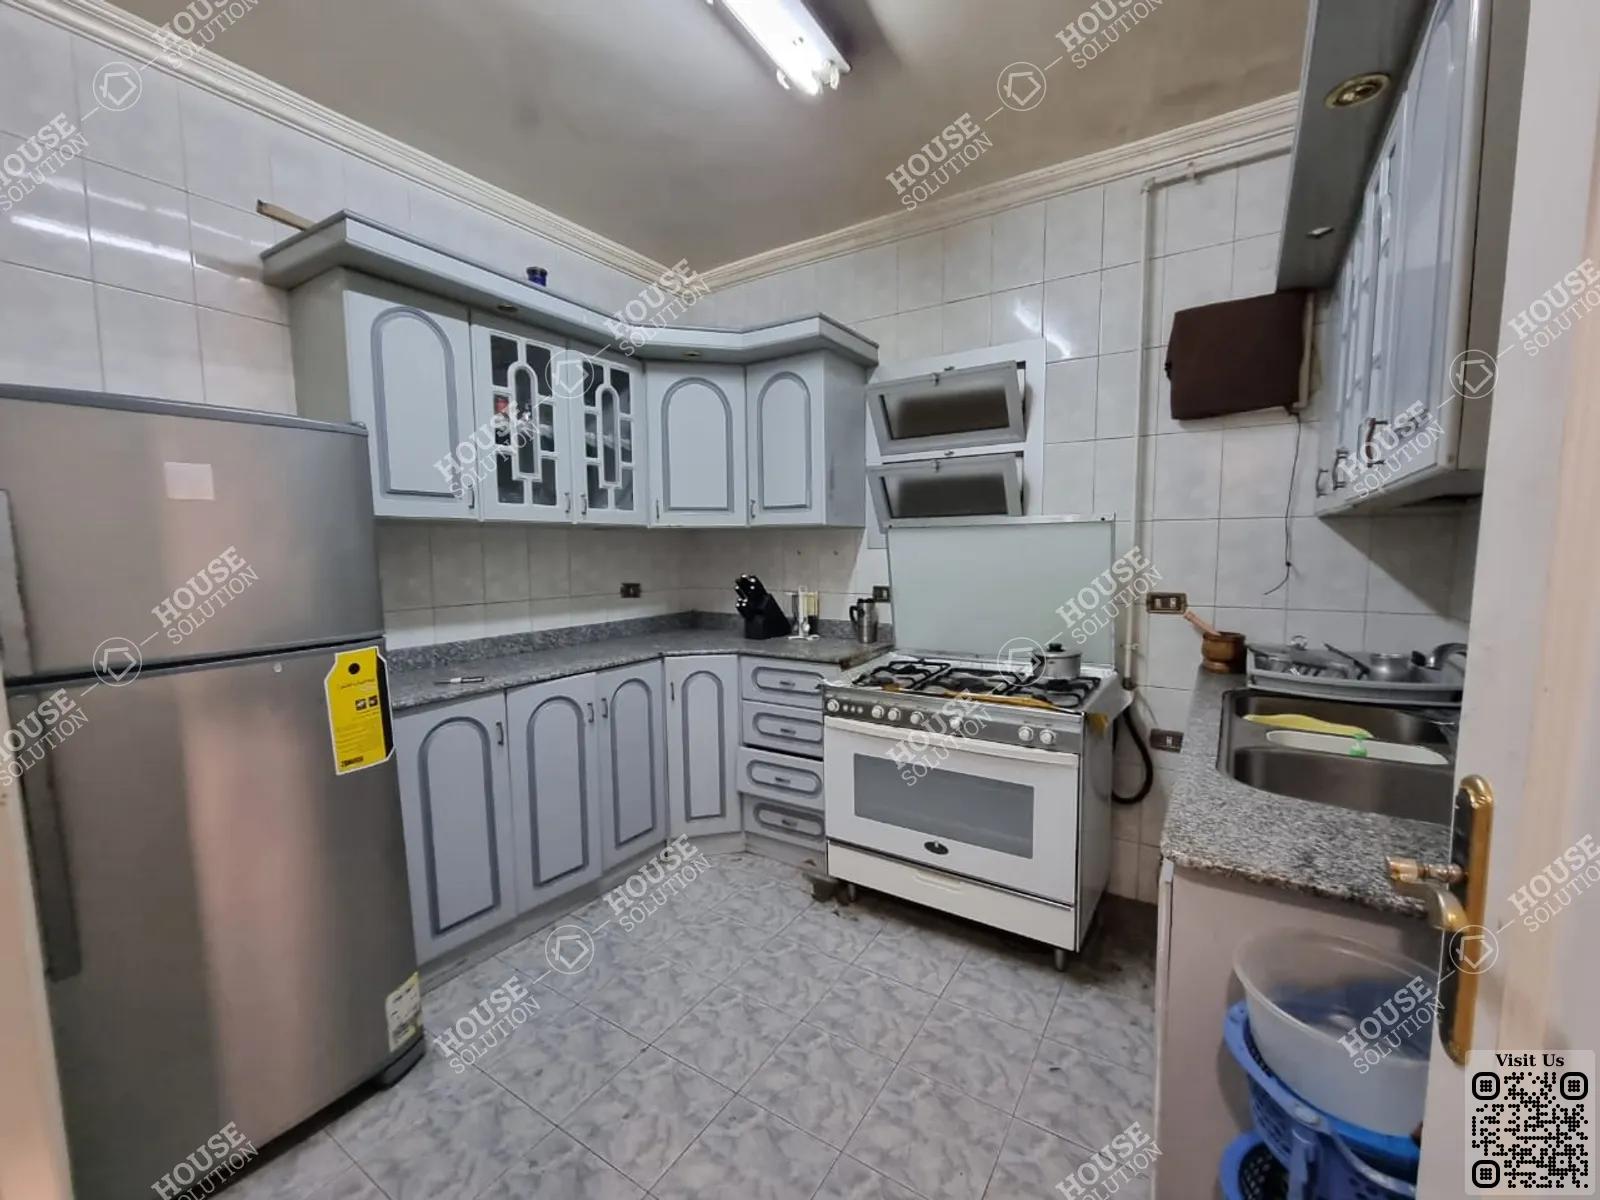 KITCHEN  @ Apartments For Rent In Maadi Maadi Sarayat Area: 180 m² consists of 3 Bedrooms 2 Bathrooms Furnished 5 stars #5373-1